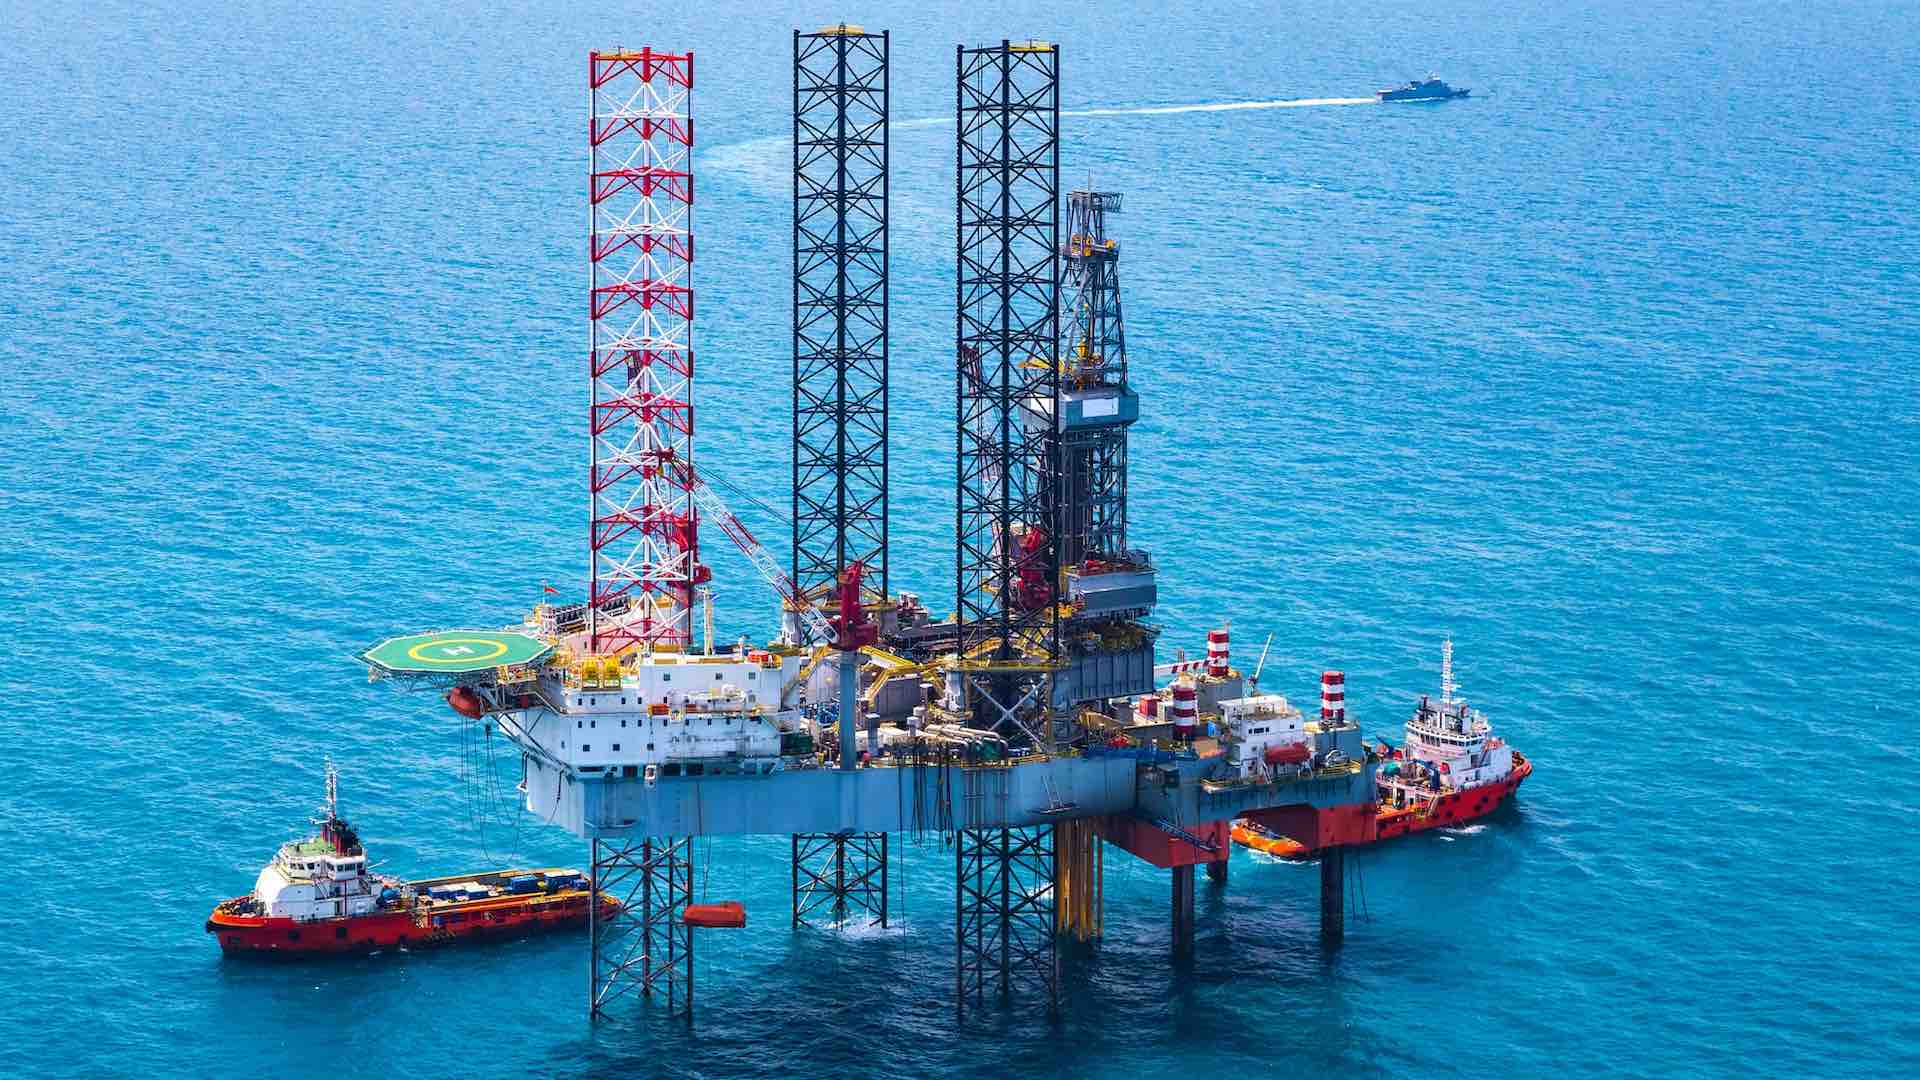 Egypt partners with global energy companies in $1.8 billion offshore exploration initiative